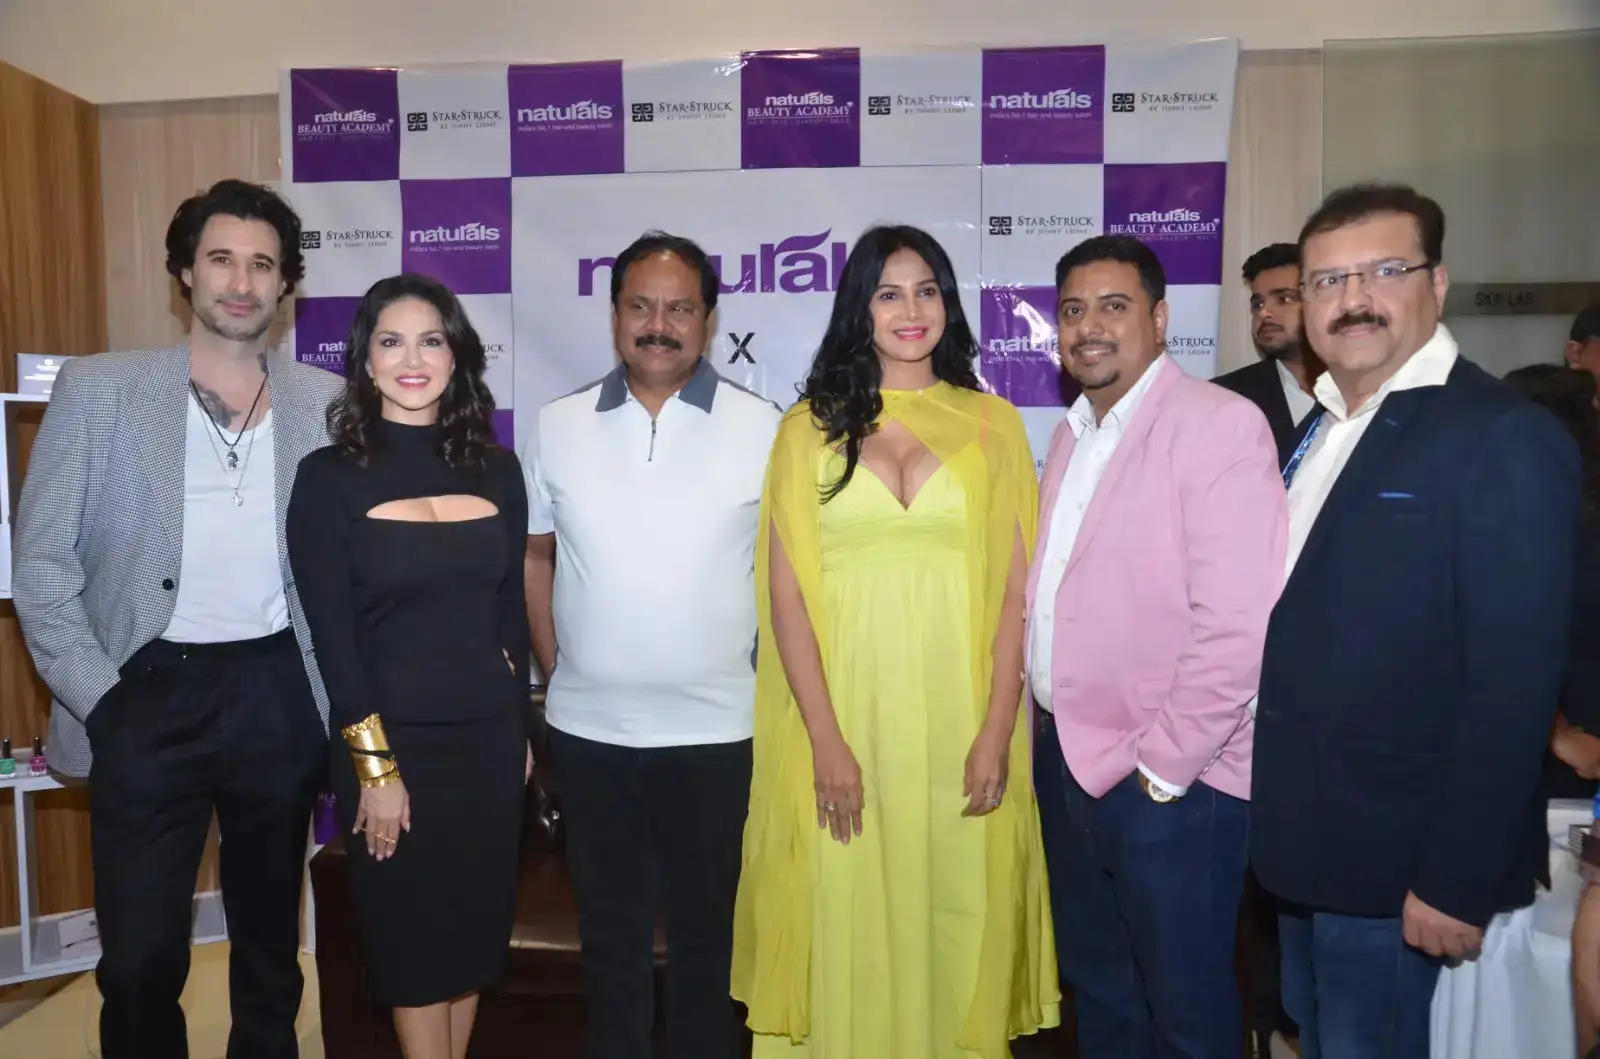 Sunny Leone stands up for 'Beauty without Cruelty' with Naturals Beauty Academy-Starstruck by Sunny Leone collab: launches Naturals Borivali outlet